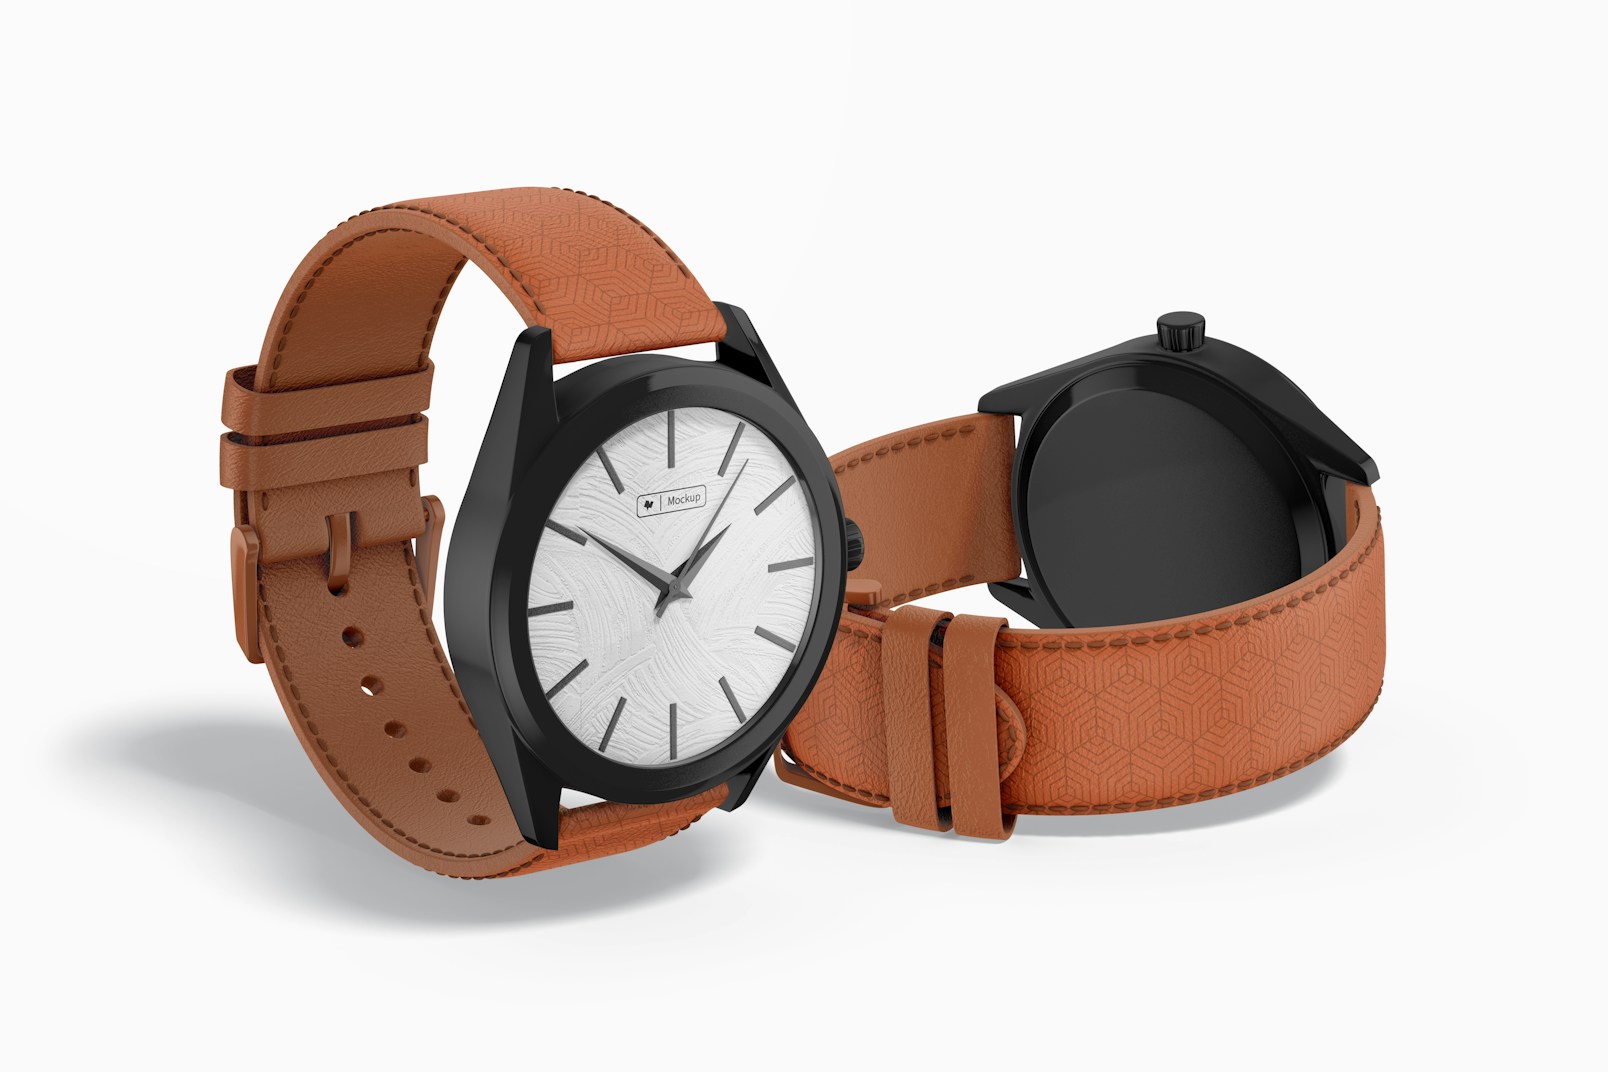 Watch with Leather Band Mockup, Standing and Dropped